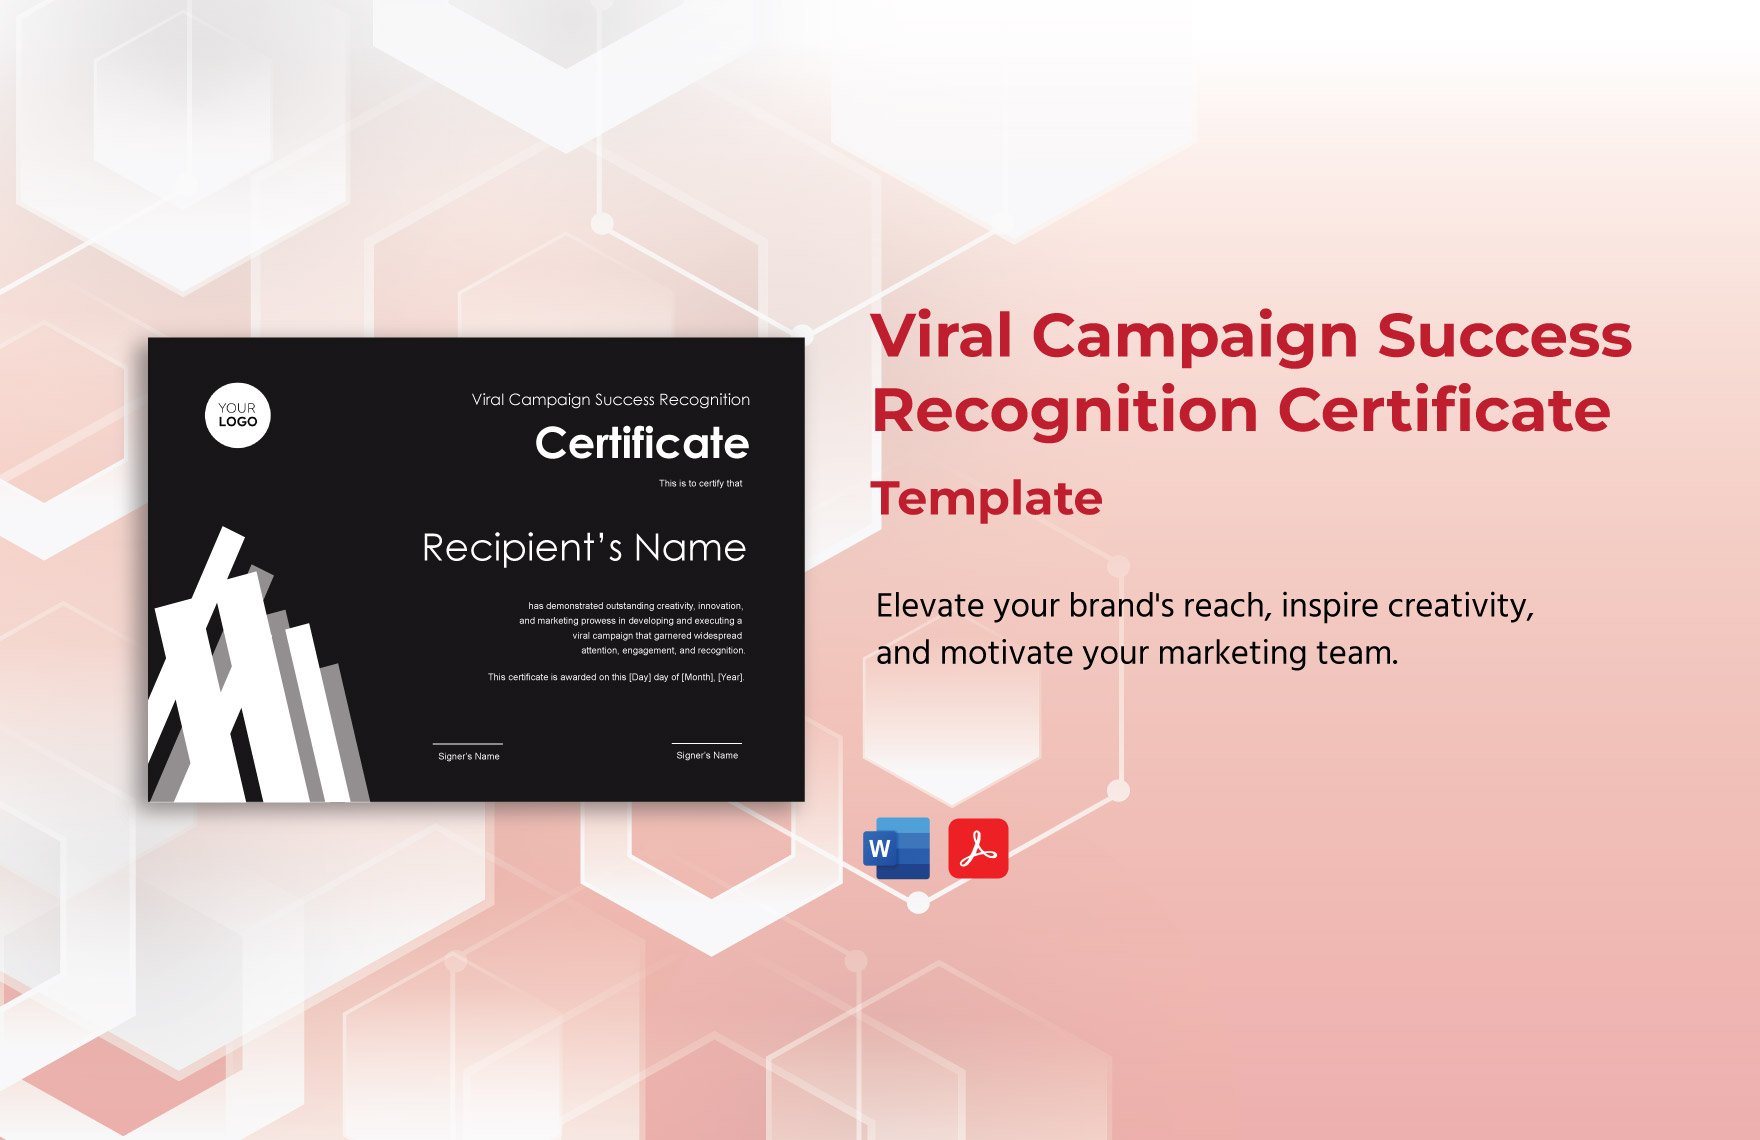 Viral Campaign Success Recognition Certificate Template